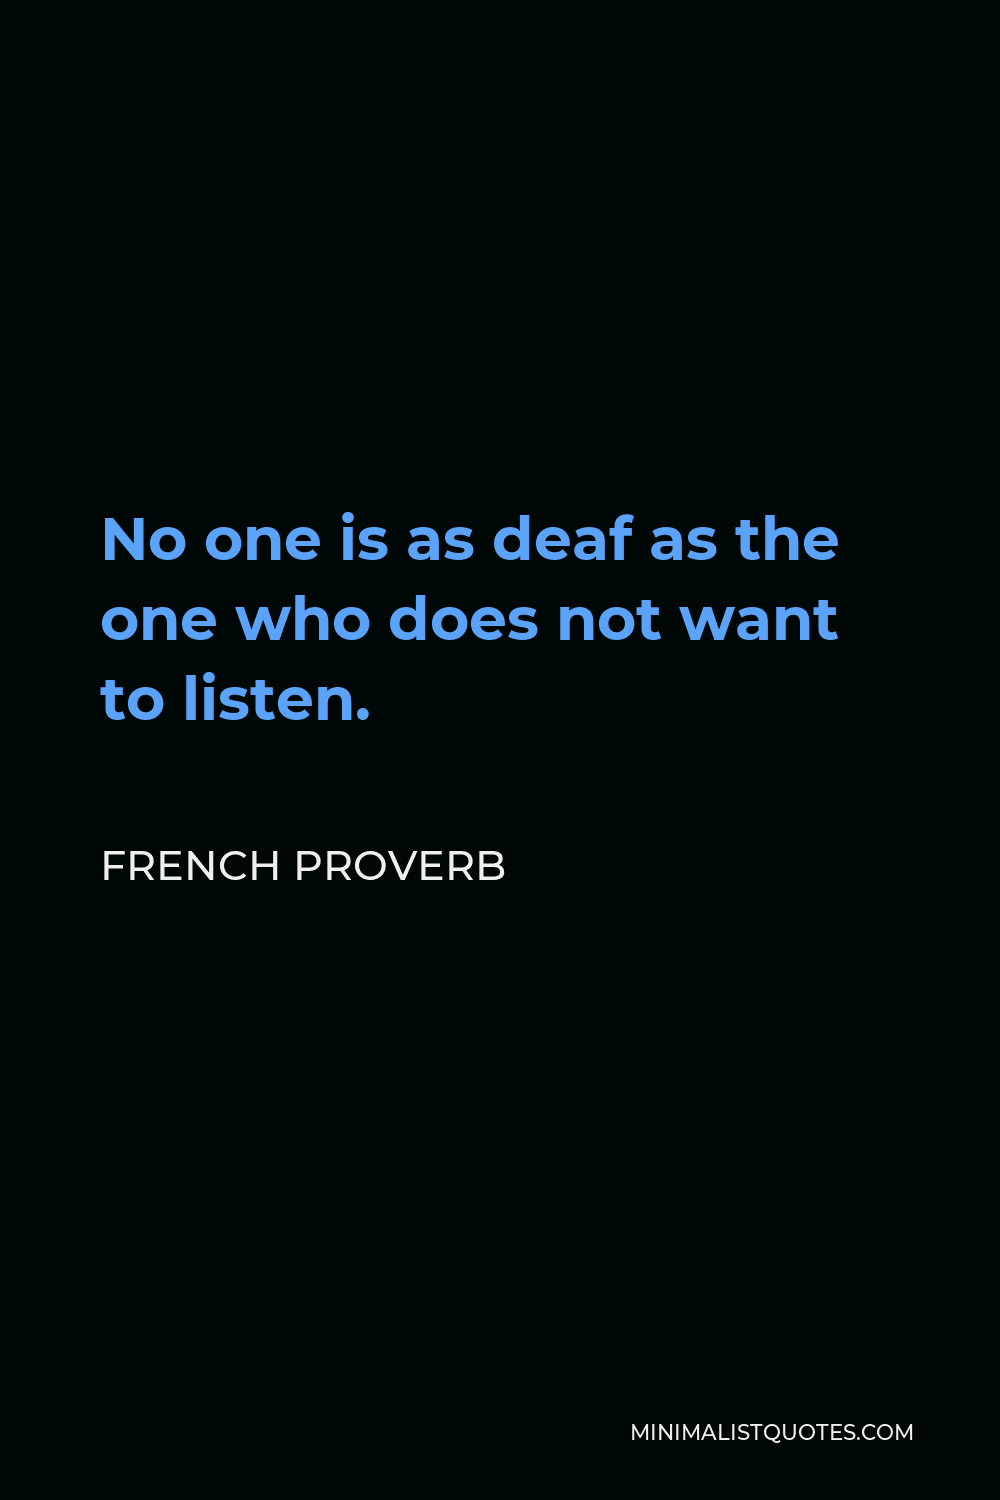 French Proverb Quote - No one is as deaf as the one who does not want to listen.